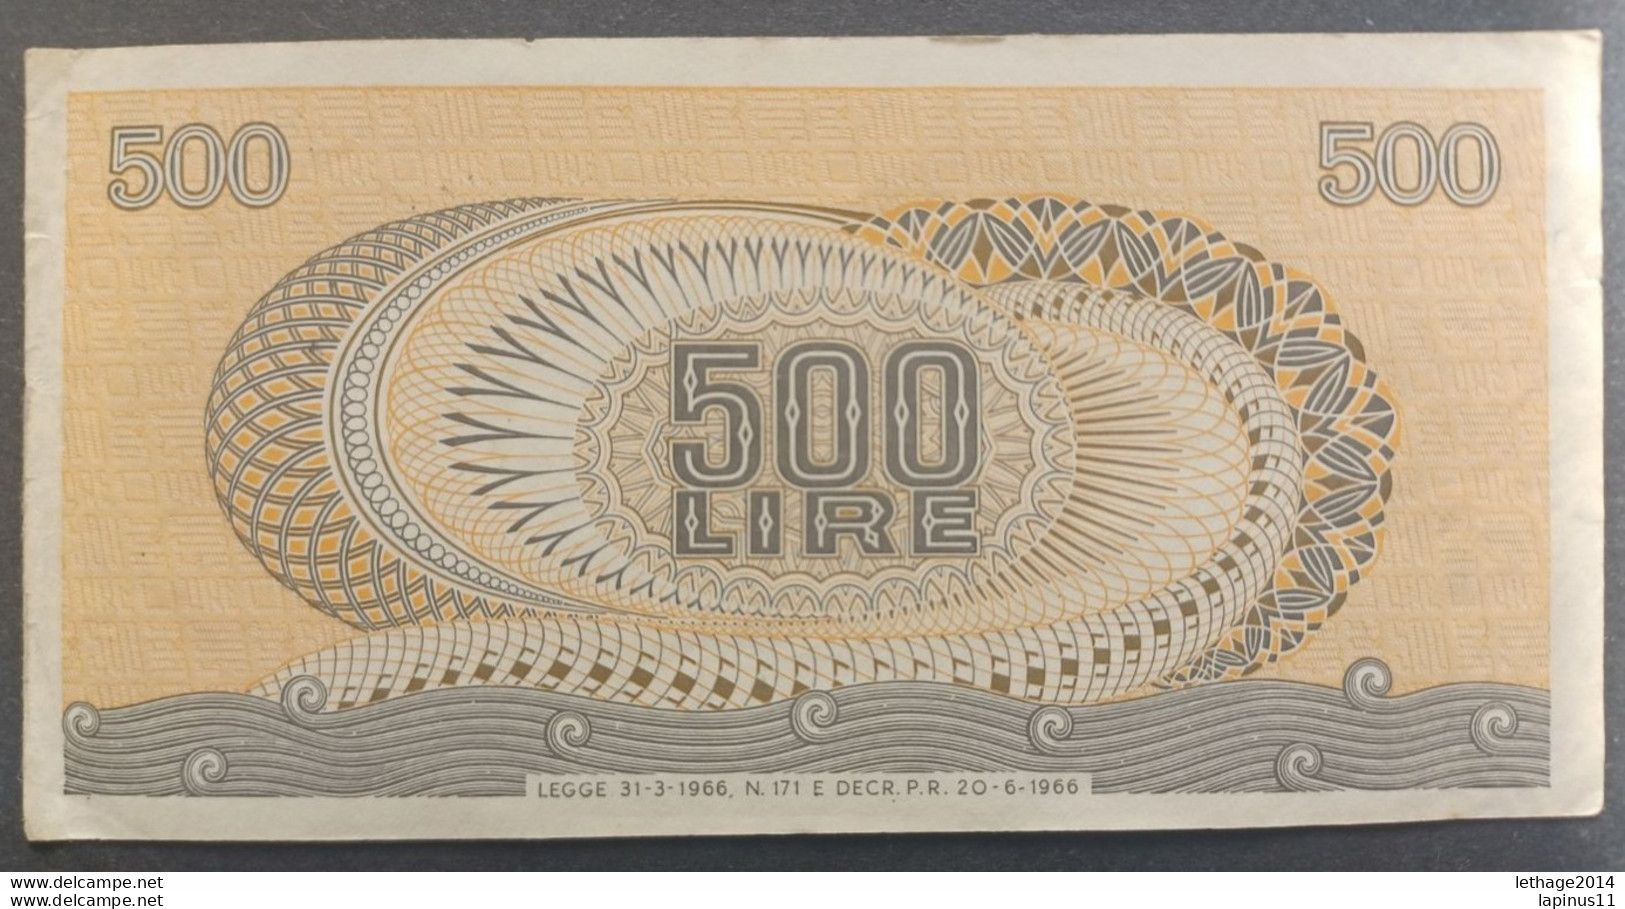 BANKNOTE ITALY 500 LIRE 1966 PRINTED GUBBELS SIGNORETTI UNCIRCULATED - 500 Liras